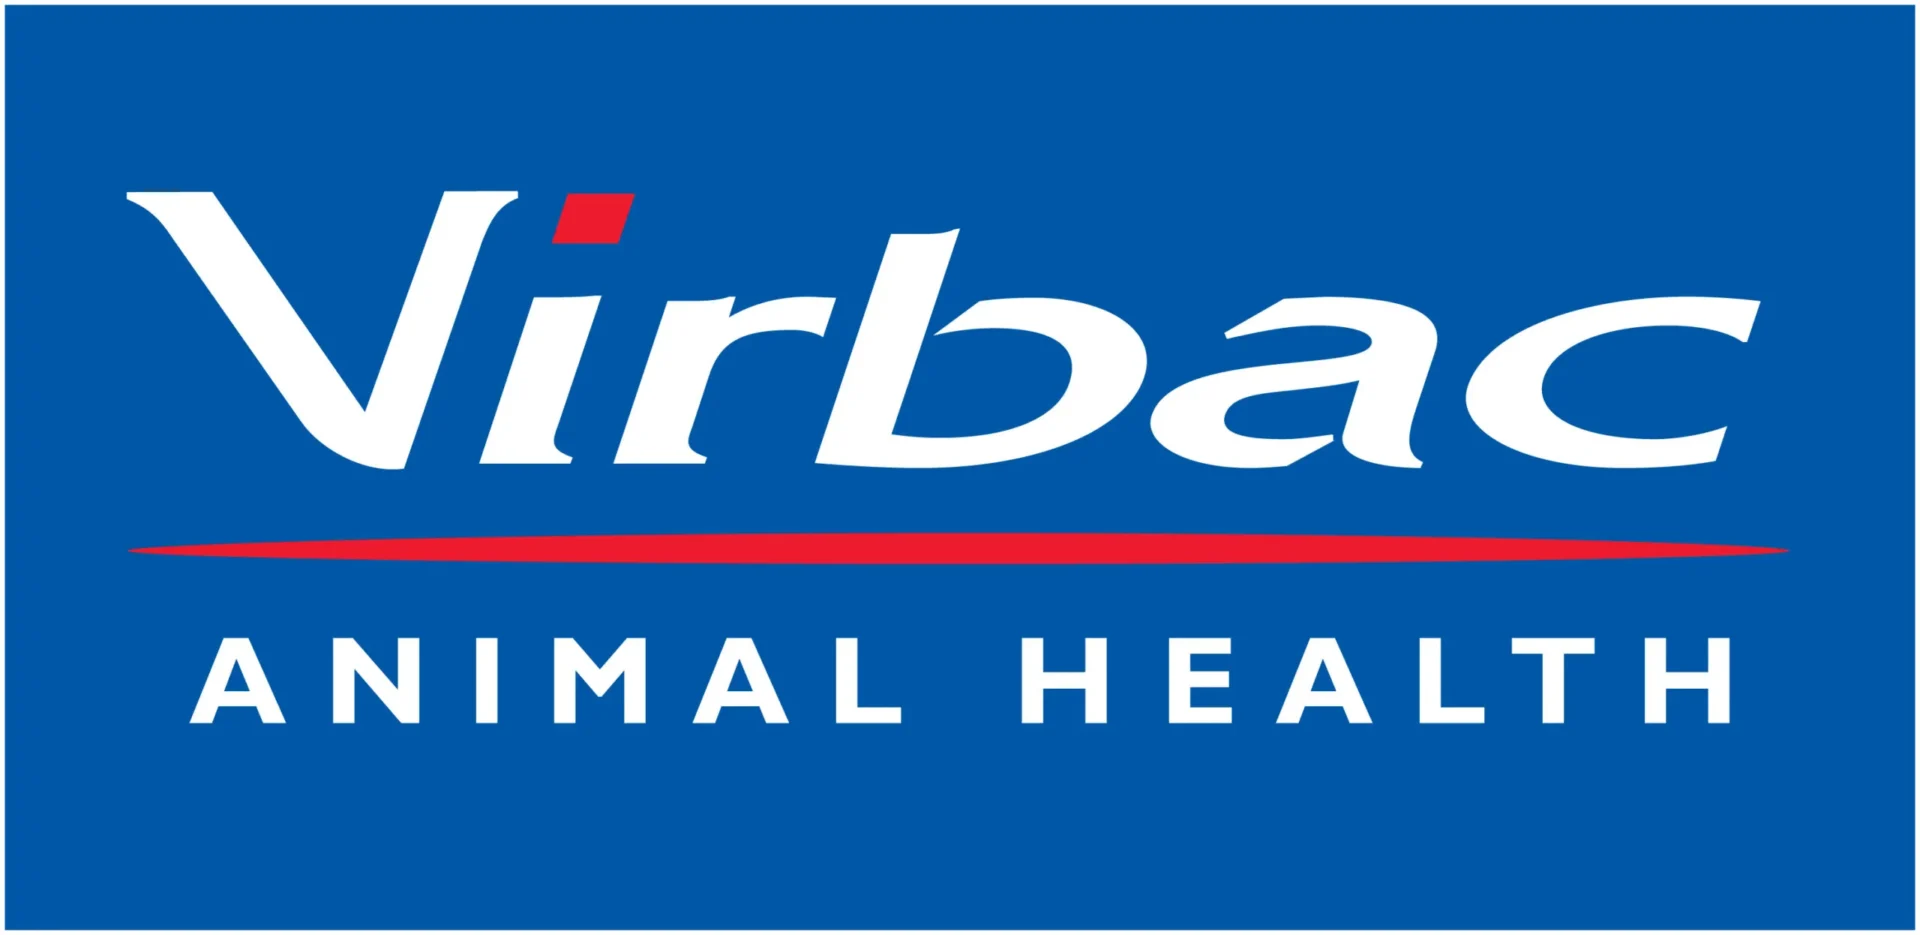 A blue and white logo for the veterinary hospital.